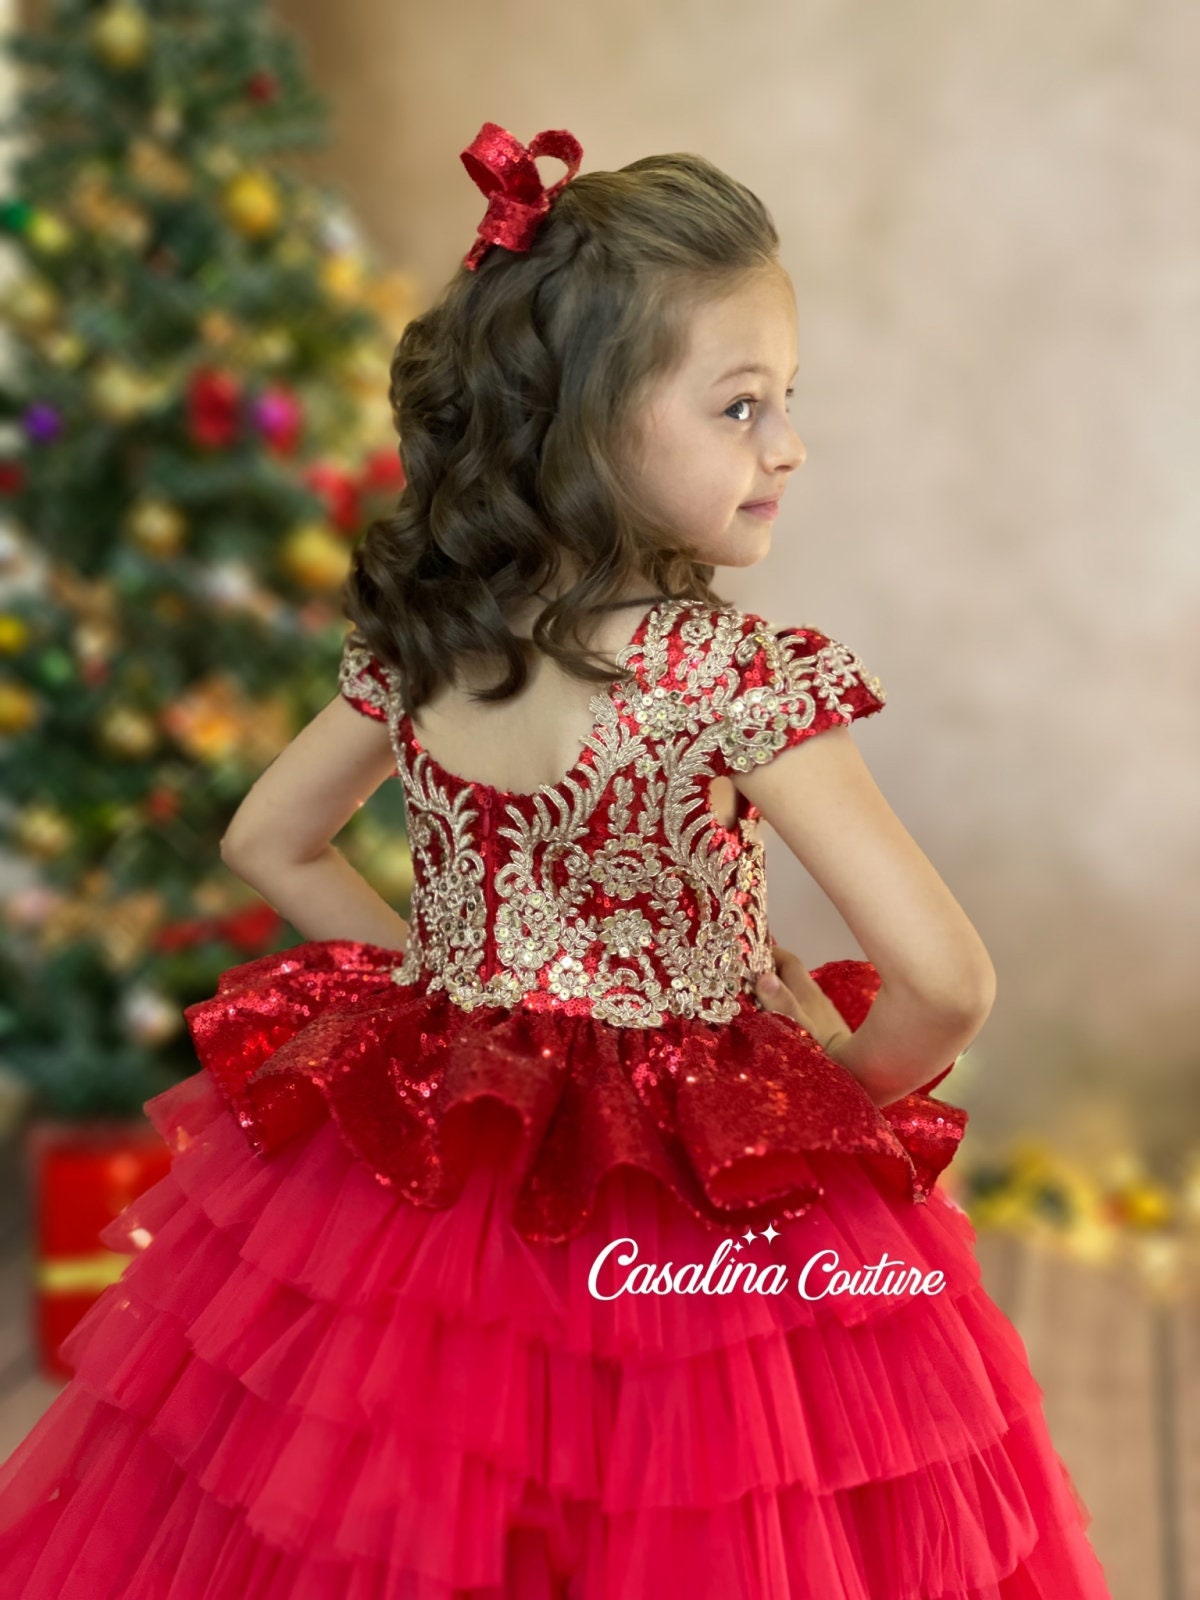 Buy Cherry Red Ruffle Dress with a Tail Online for Girls - ForeverKidz